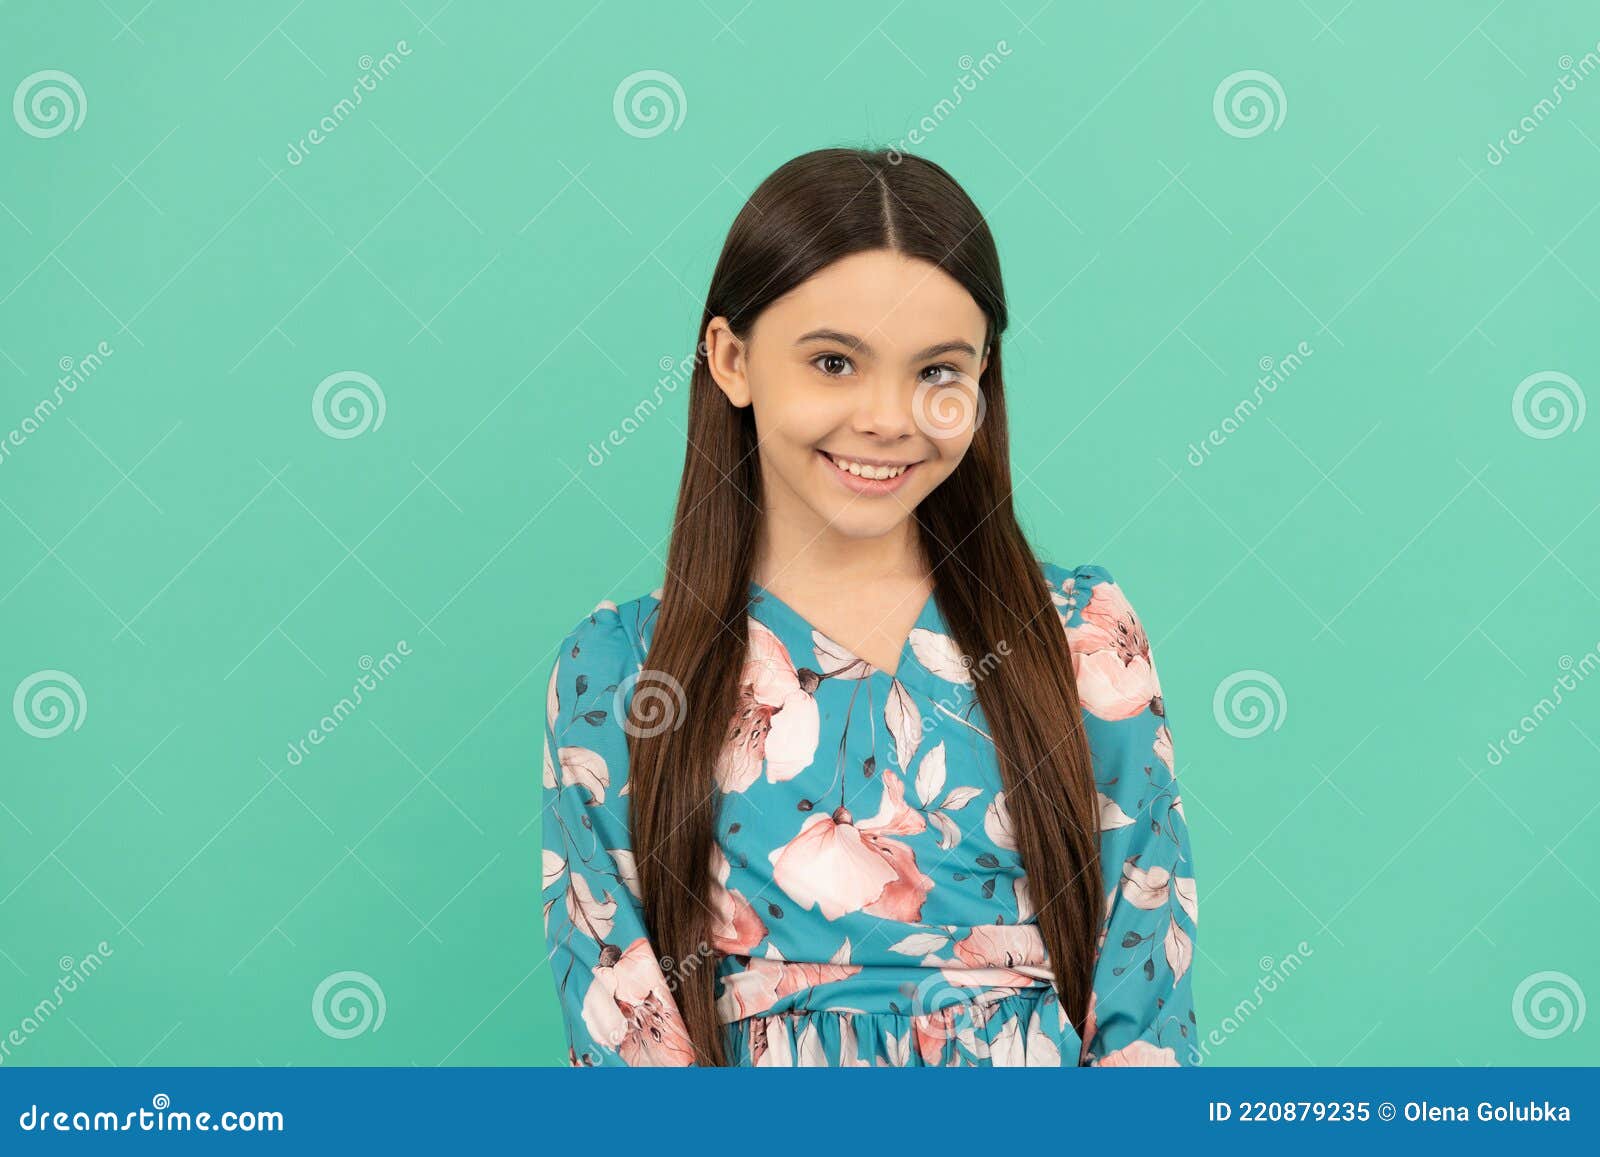 all the taste of being a girl. happy girl child smile blue background. girlhood and childhood